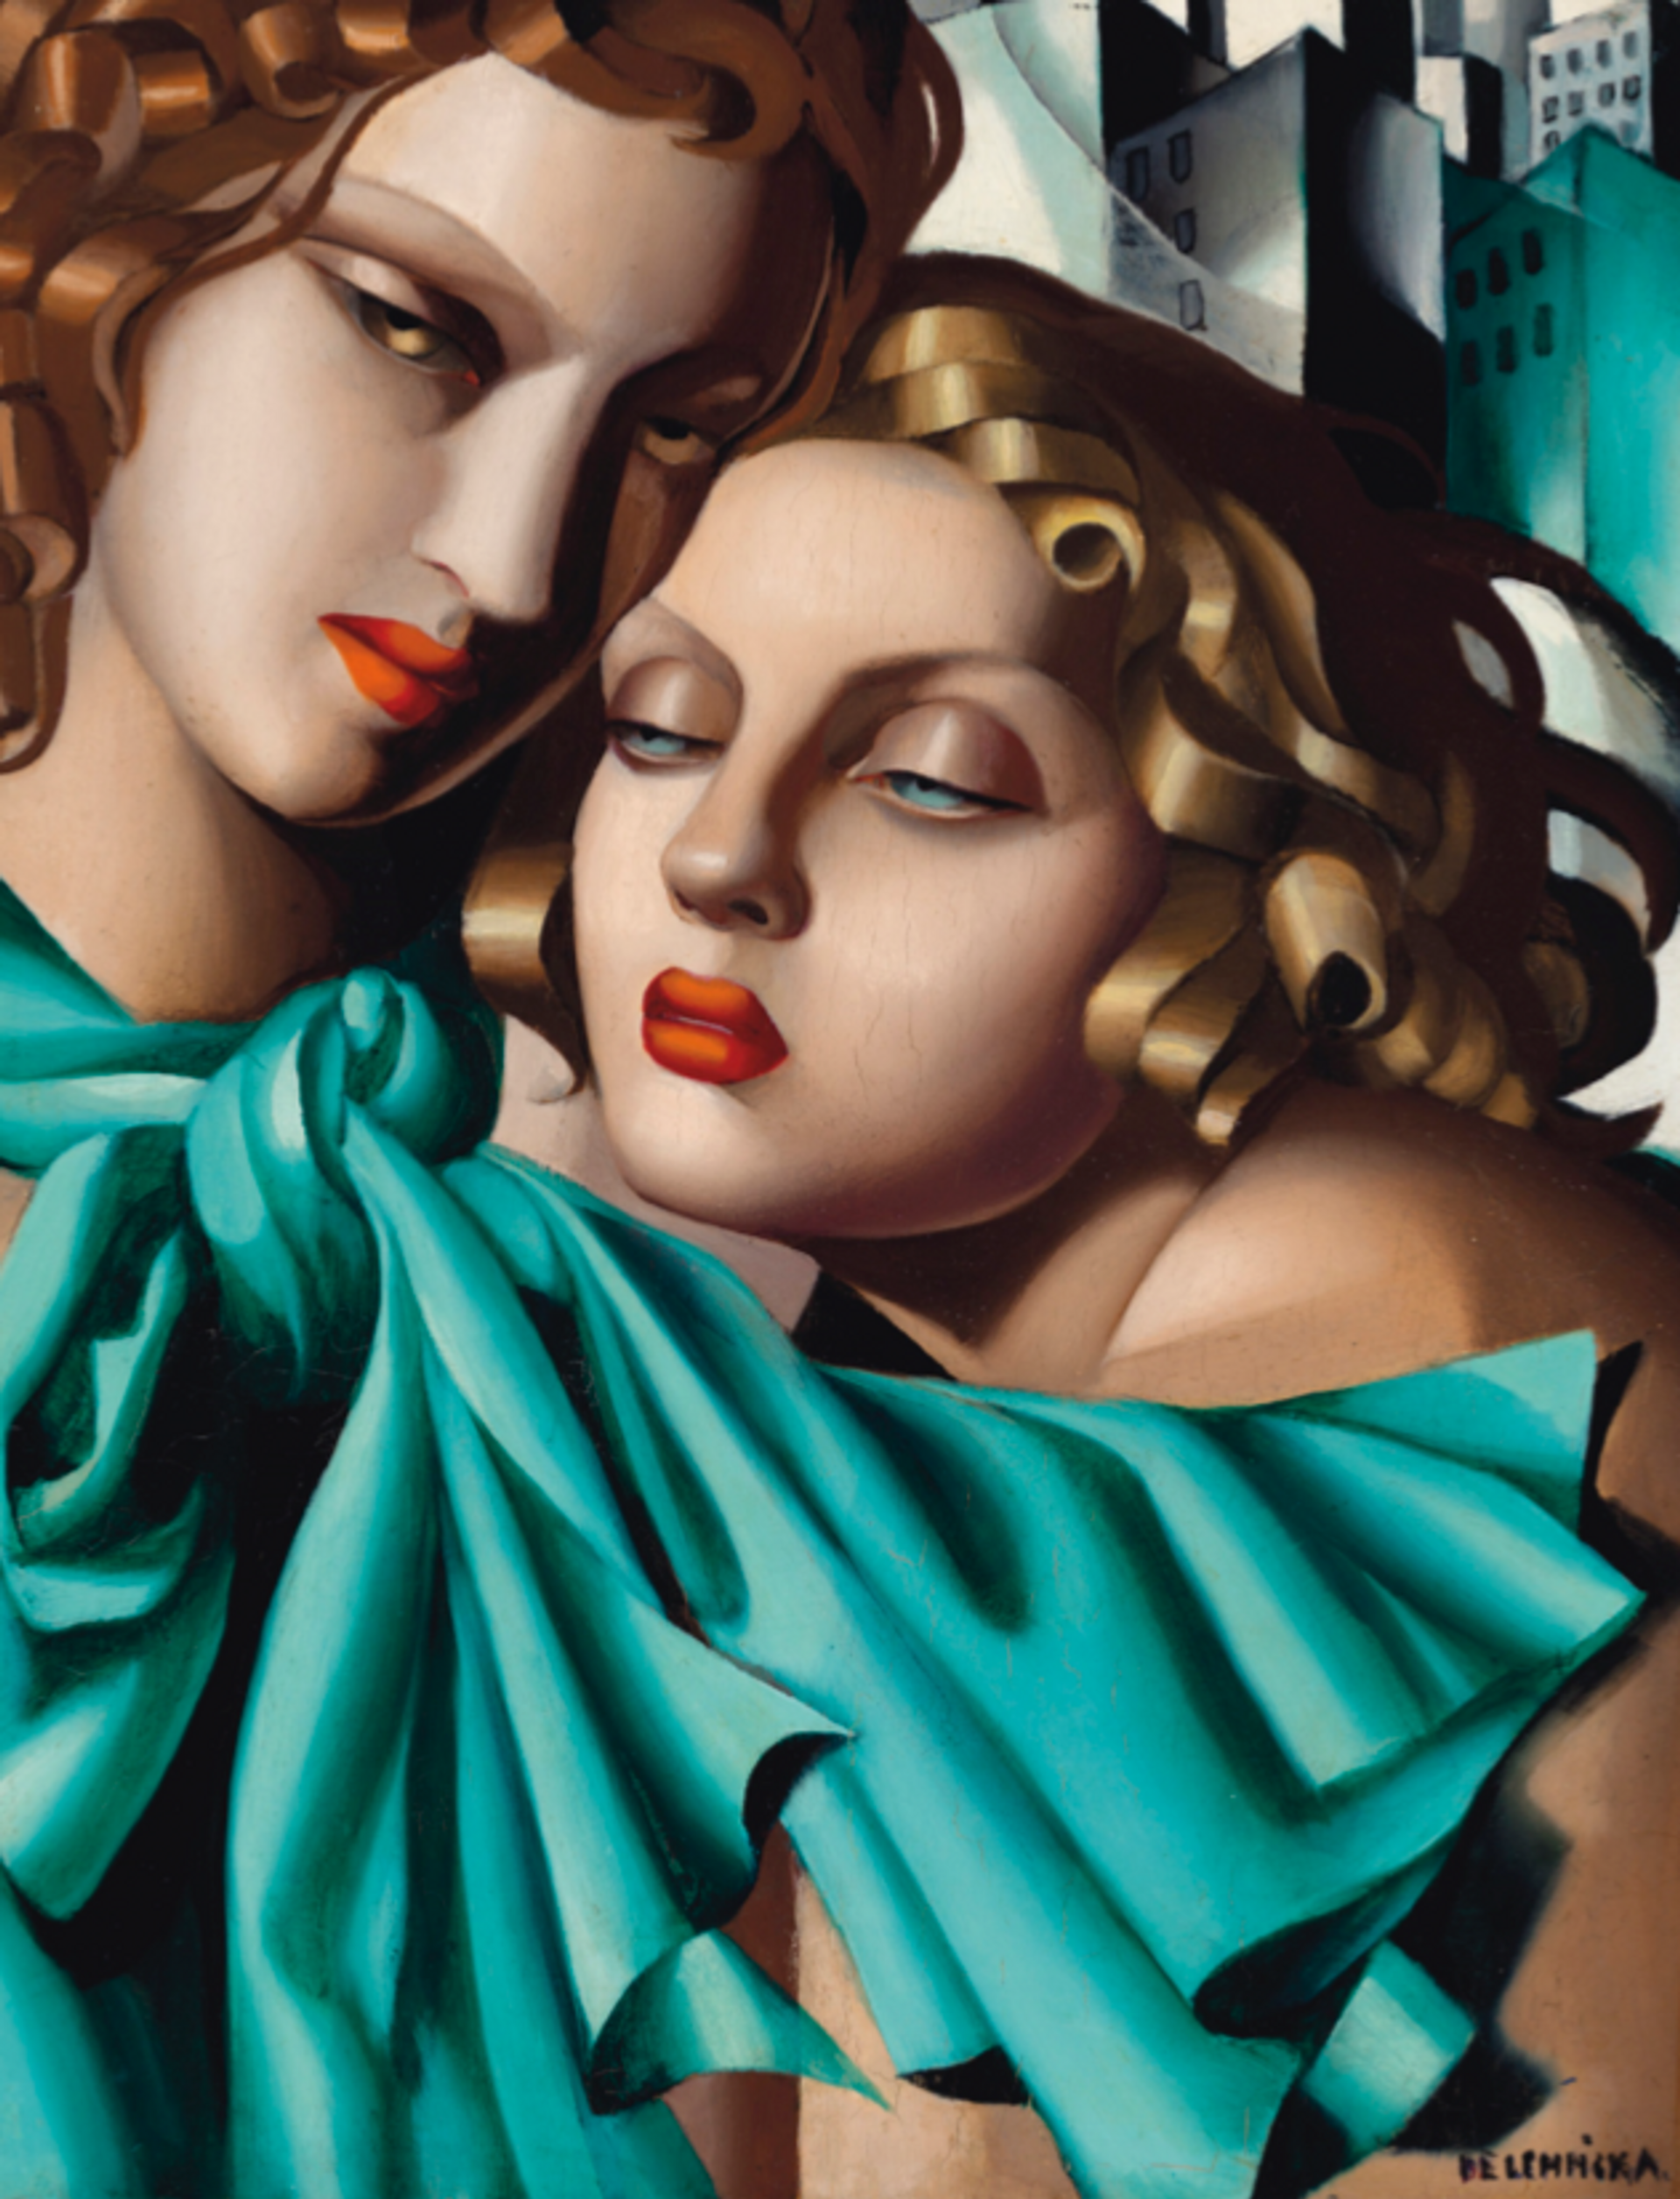 Tamara de Lempicka's Les Jeunes Filles (circa 1930) is on view at Kosciuszko Projects. The work will be offered by Christie's on 11 November in its Impressionist and Modern art evening sale. Christie's Images Ltd.